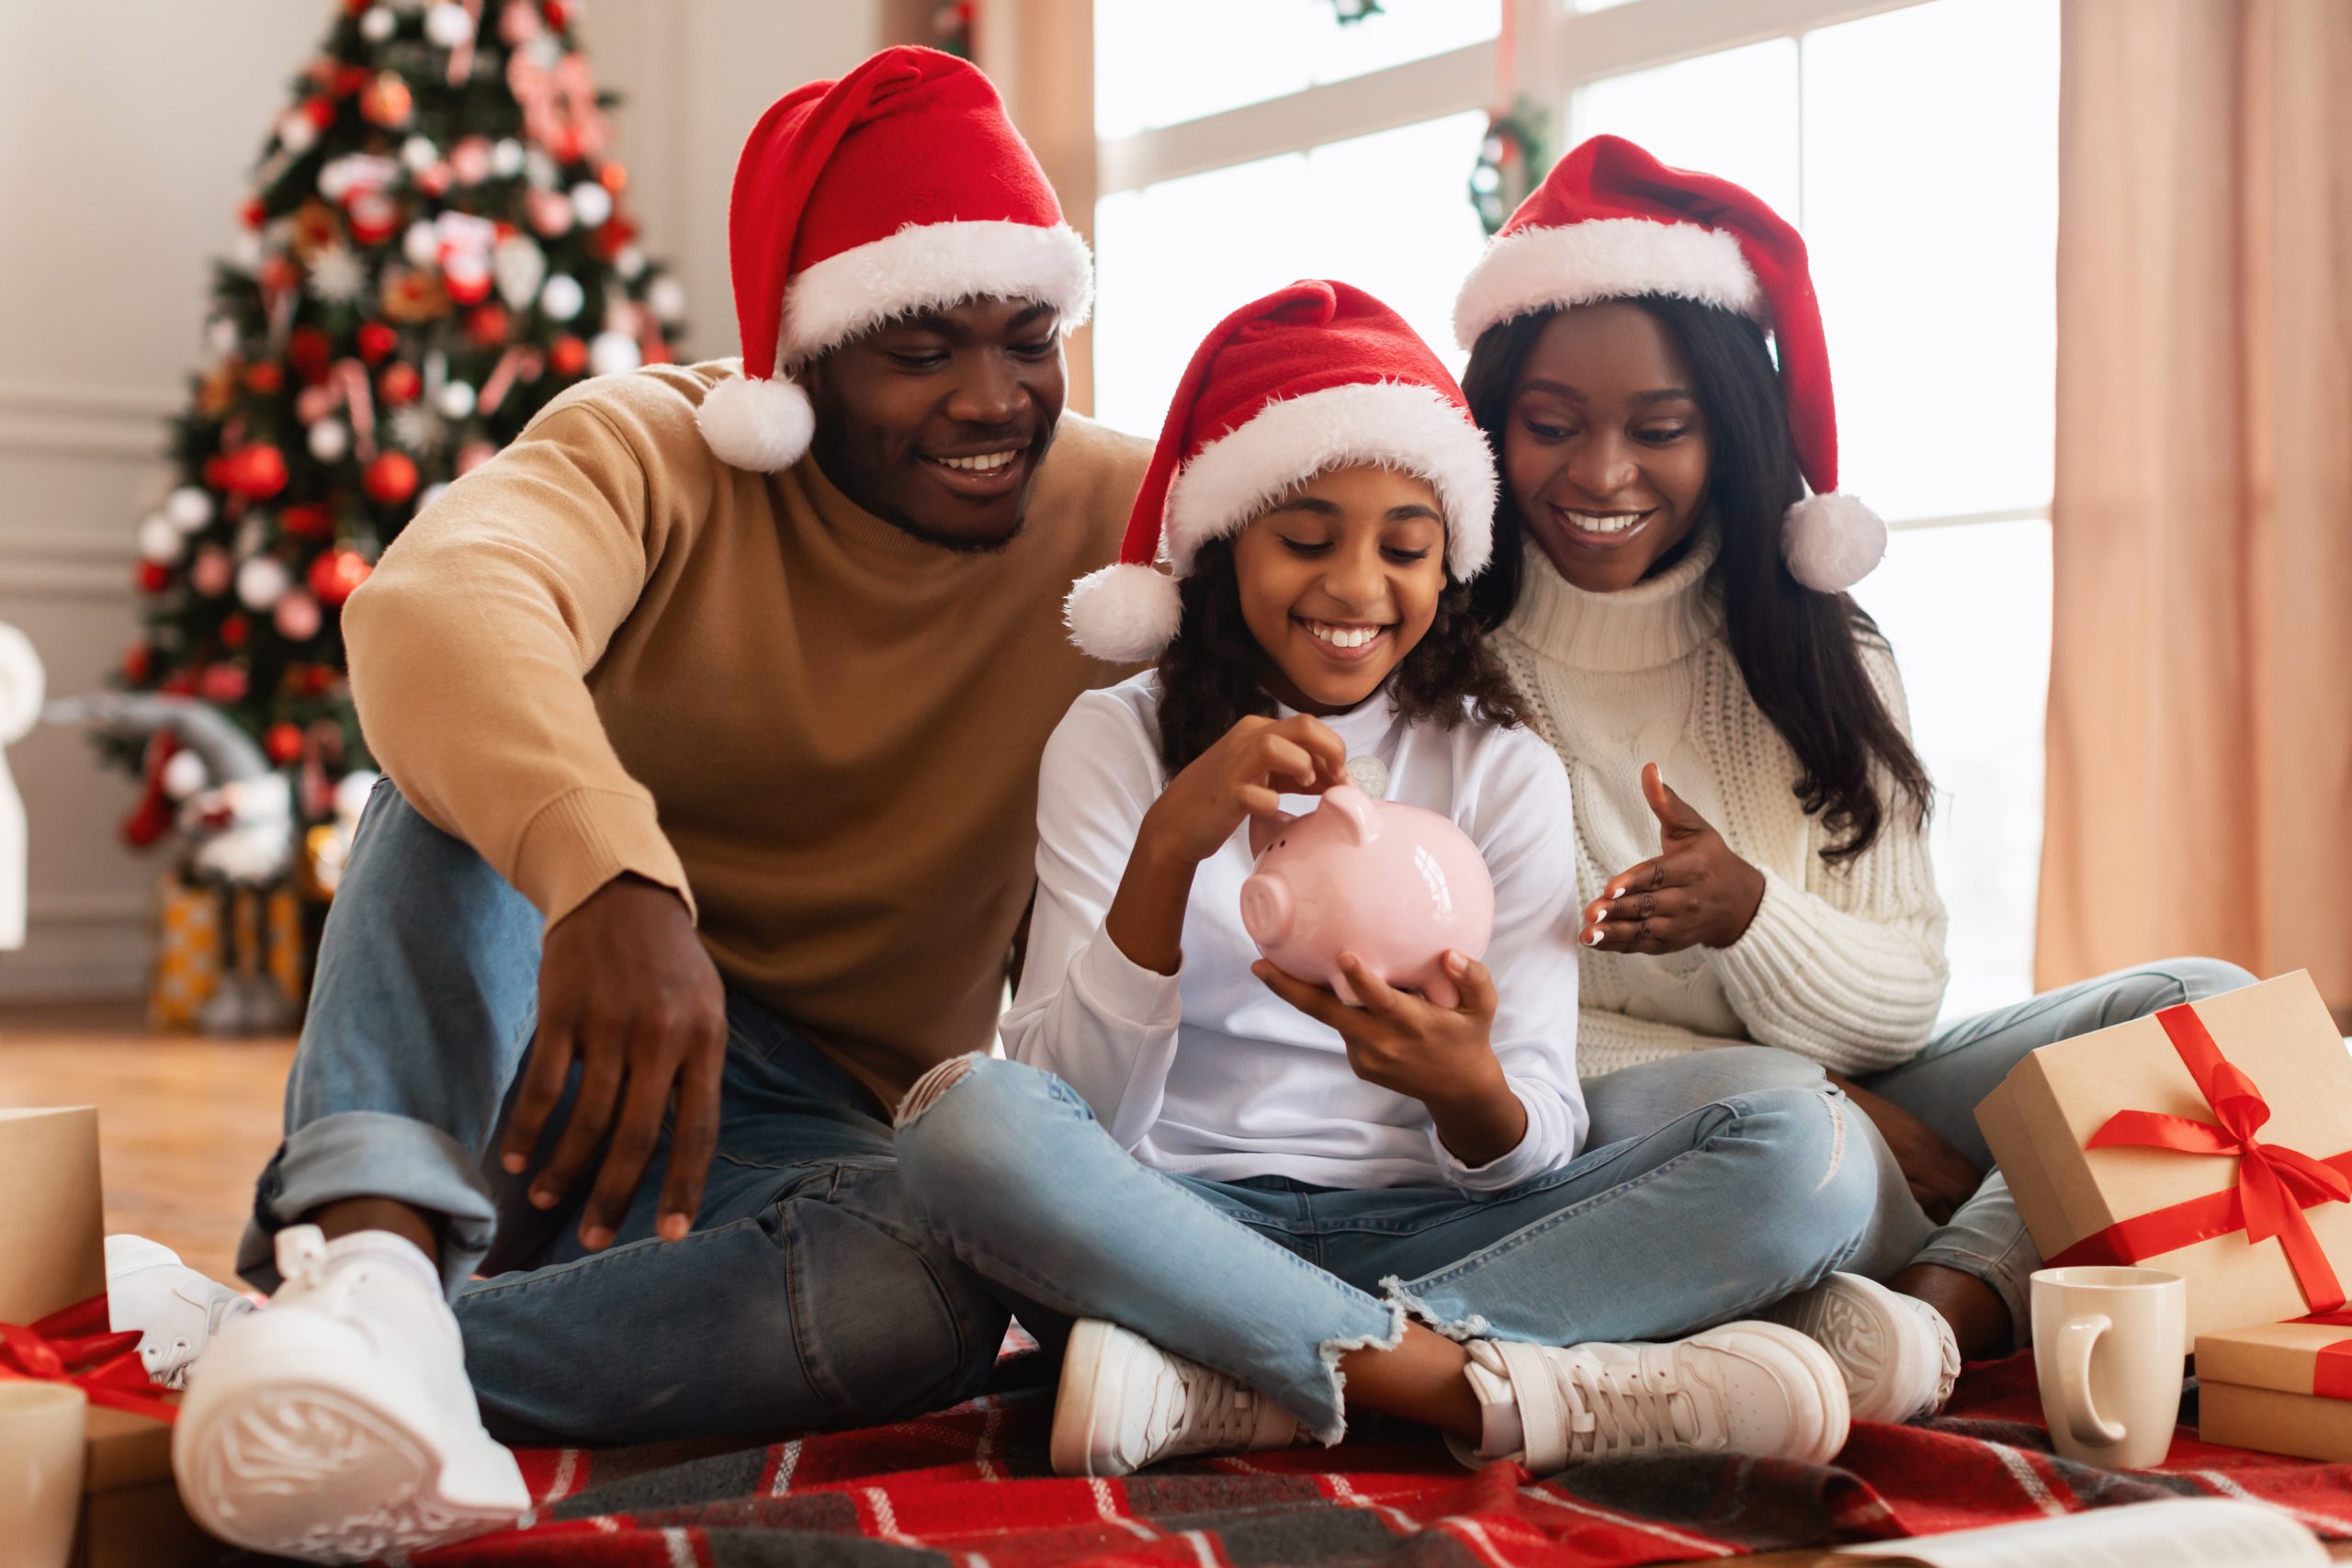 Christmas On A Budget: Top tips to help your cash go further this holiday season